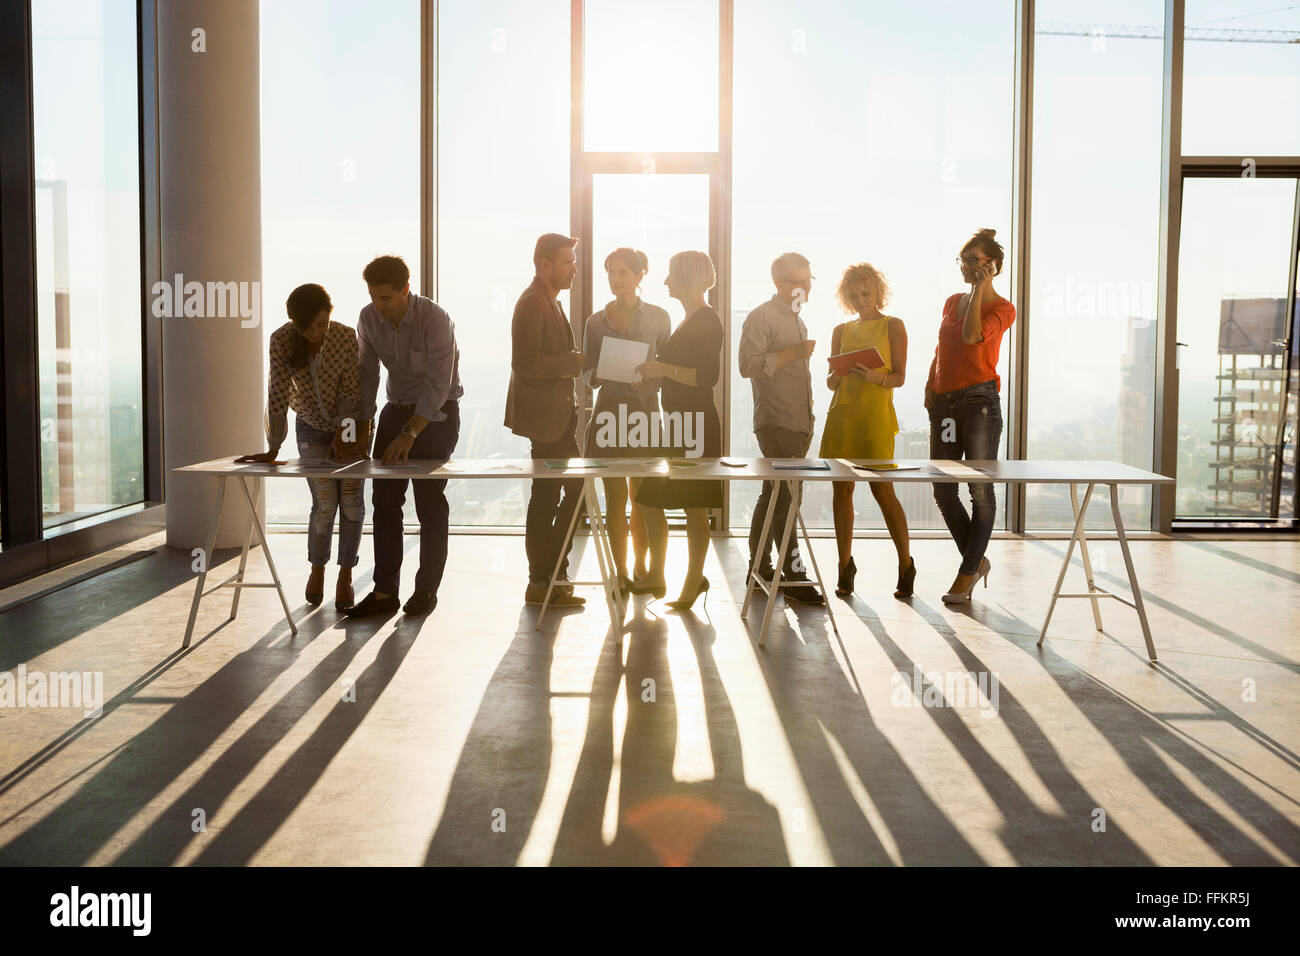 Team of architects in business meeting against urban skyline Stock Photo